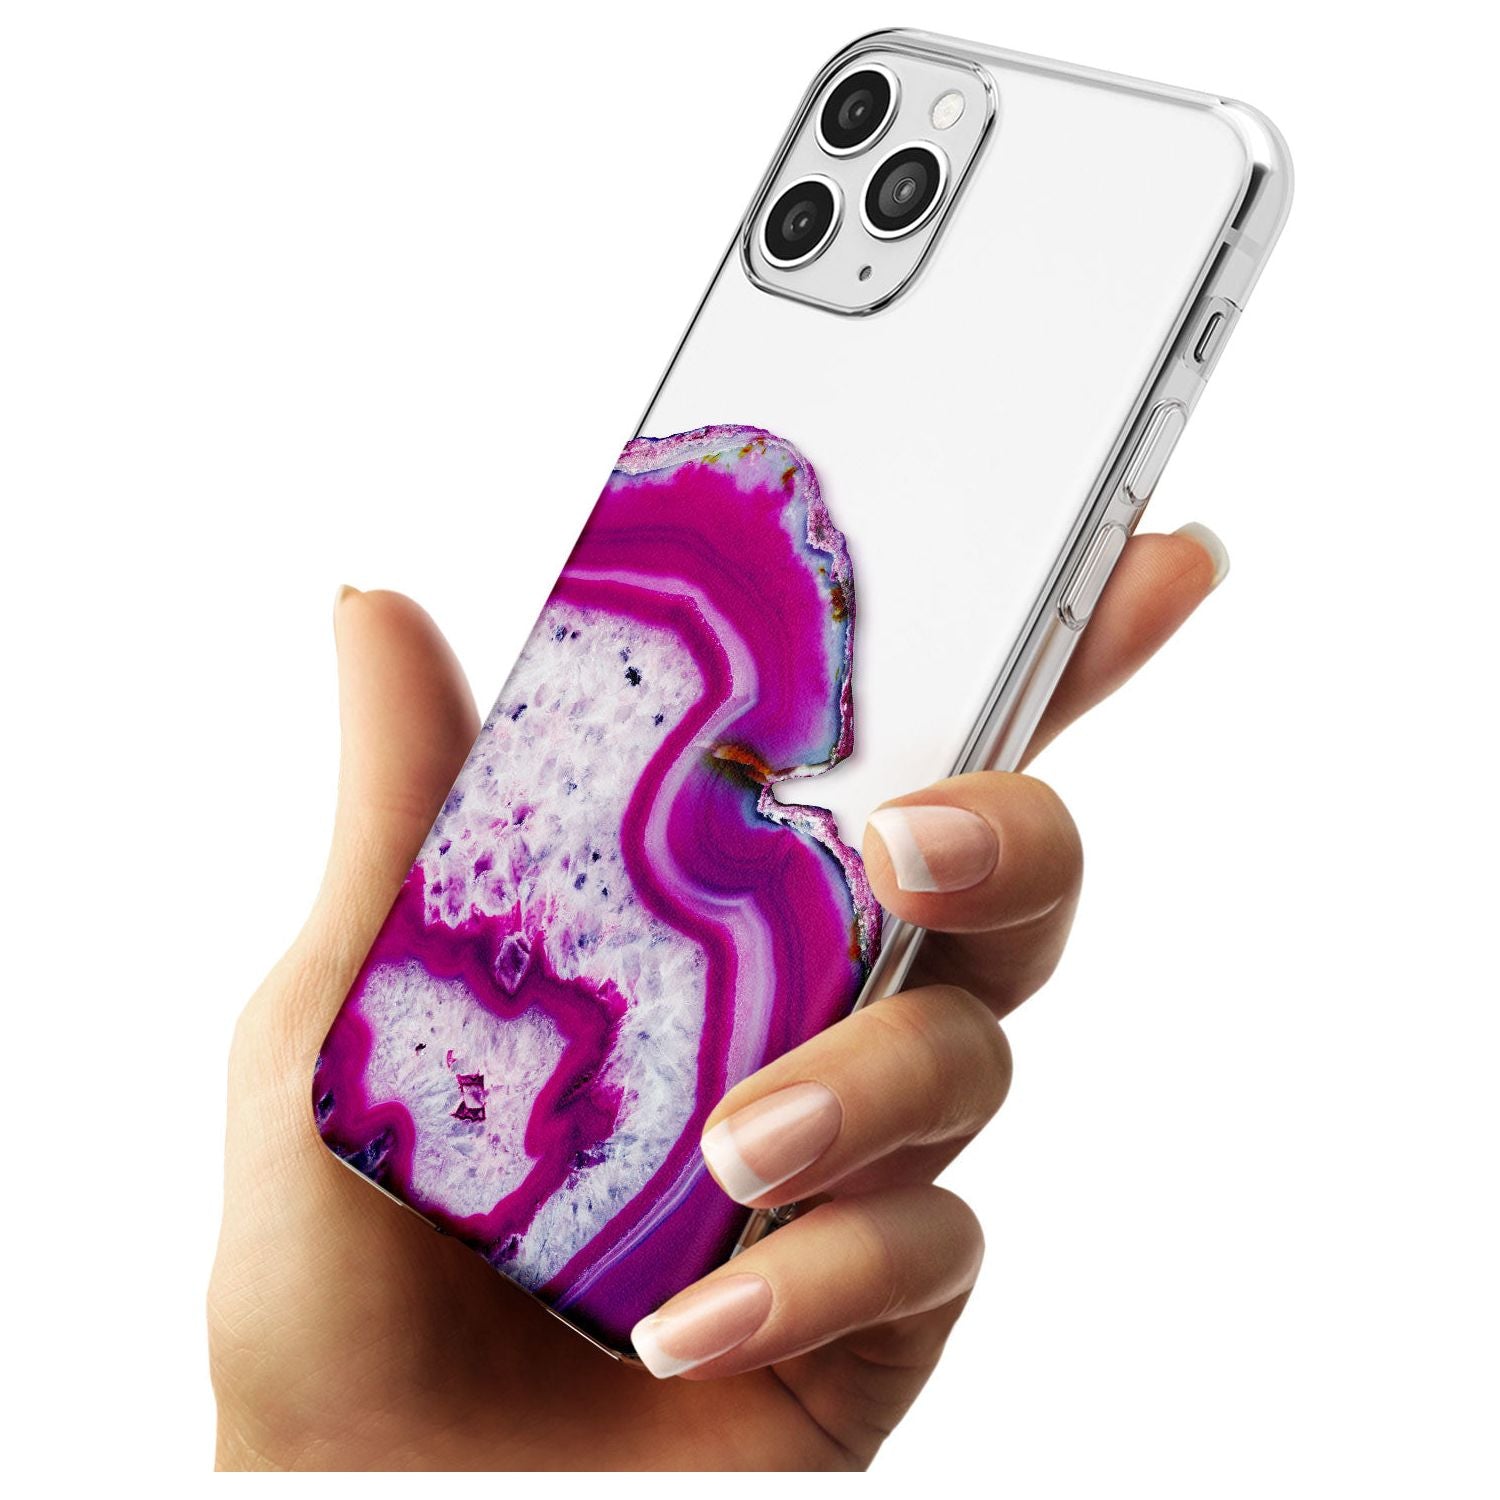 Violet & White Swirl Agate Crystal Clear Design Slim TPU Phone Case for iPhone 11 Pro Max